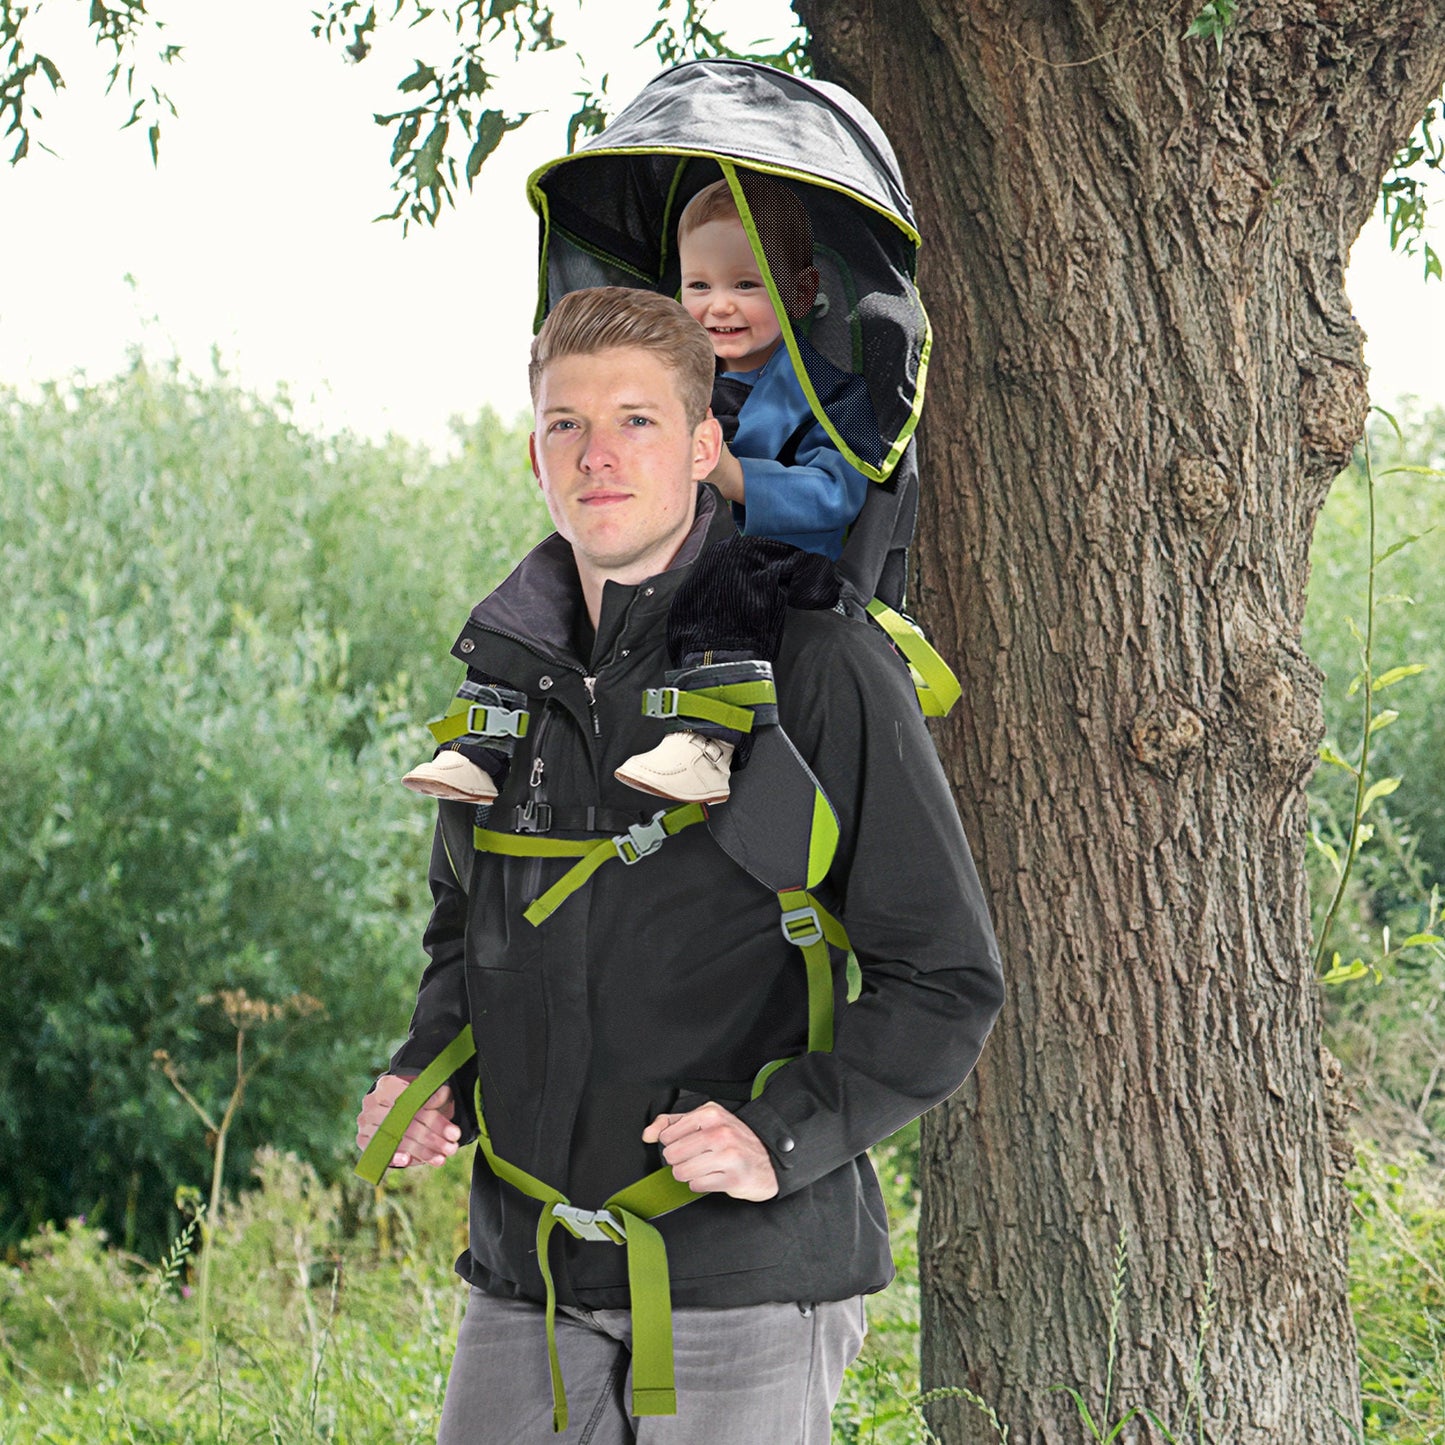 Outdoor and Garden-Baby Backpack Carrier for Hiking with Detachable Canopy, Foldable Child Carrier Outdoor with Adjustable Waist Belt, Safety Belts, for 6-36 Months - Outdoor Style Company